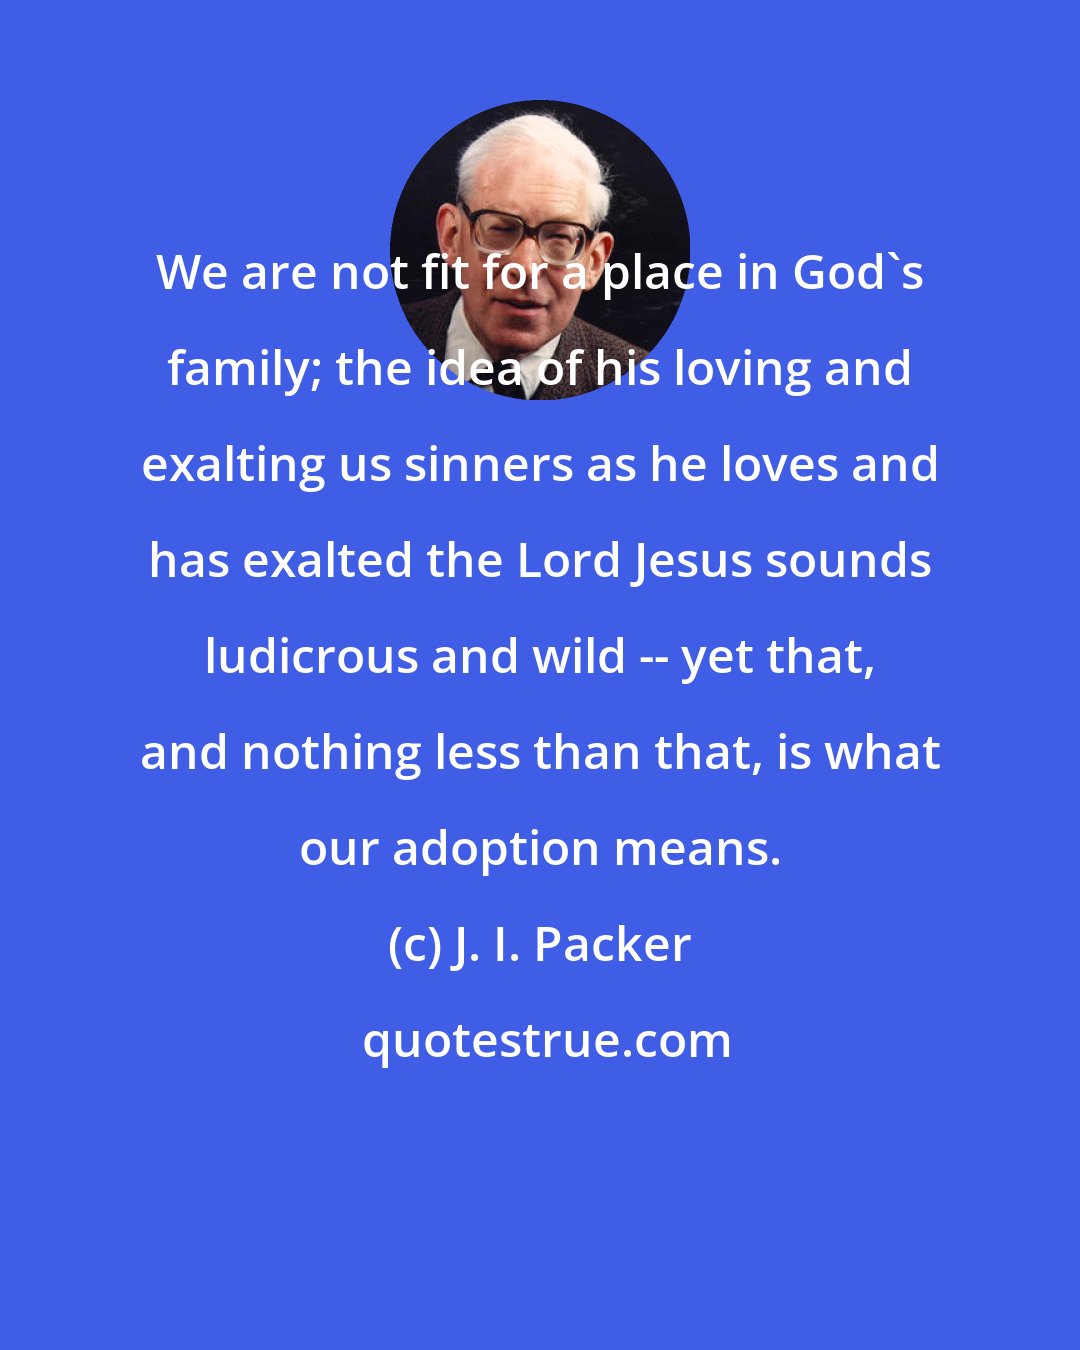 J. I. Packer: We are not fit for a place in God's family; the idea of his loving and exalting us sinners as he loves and has exalted the Lord Jesus sounds ludicrous and wild -- yet that, and nothing less than that, is what our adoption means.